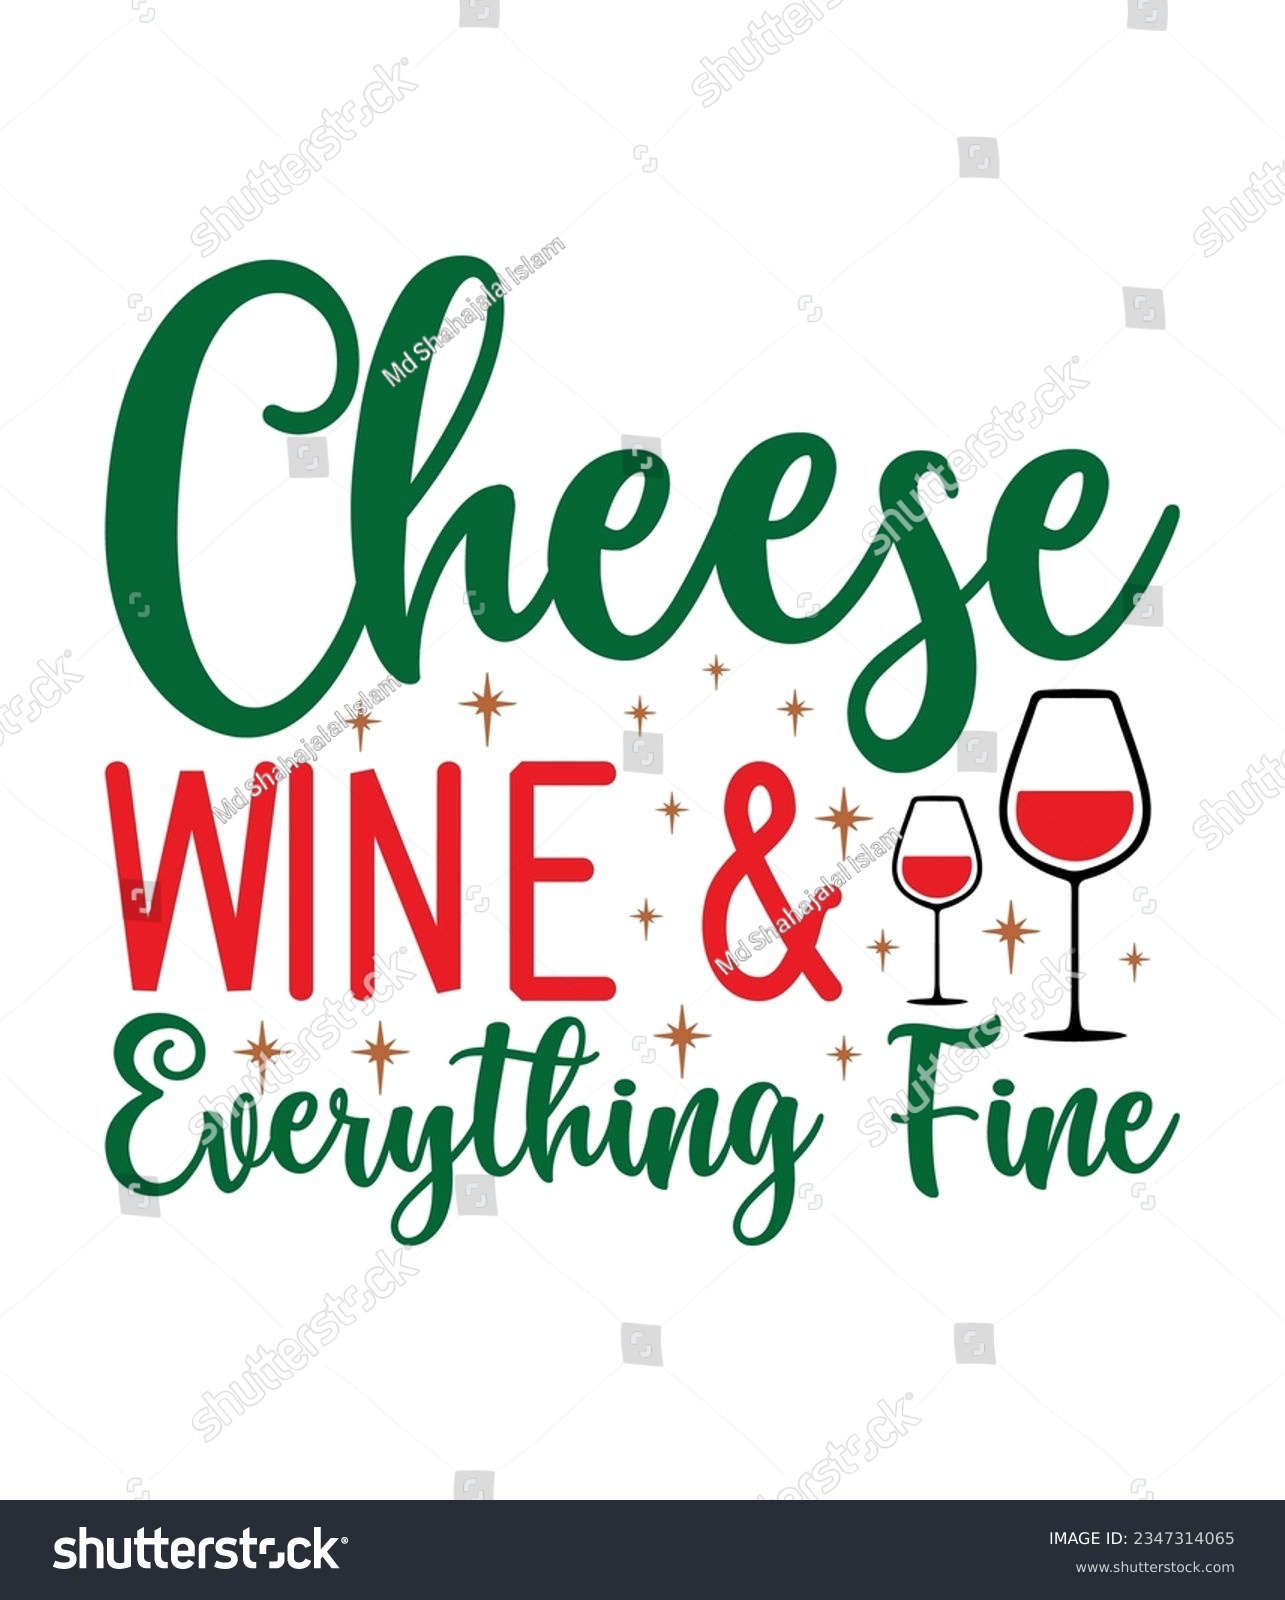 SVG of Cheese wine and everything fine, Christmas SVG, Funny Christmas Quotes, Winter SVG, Merry Christmas, Santa SVG, typography, vintage, t shirts design, Holiday shirt svg